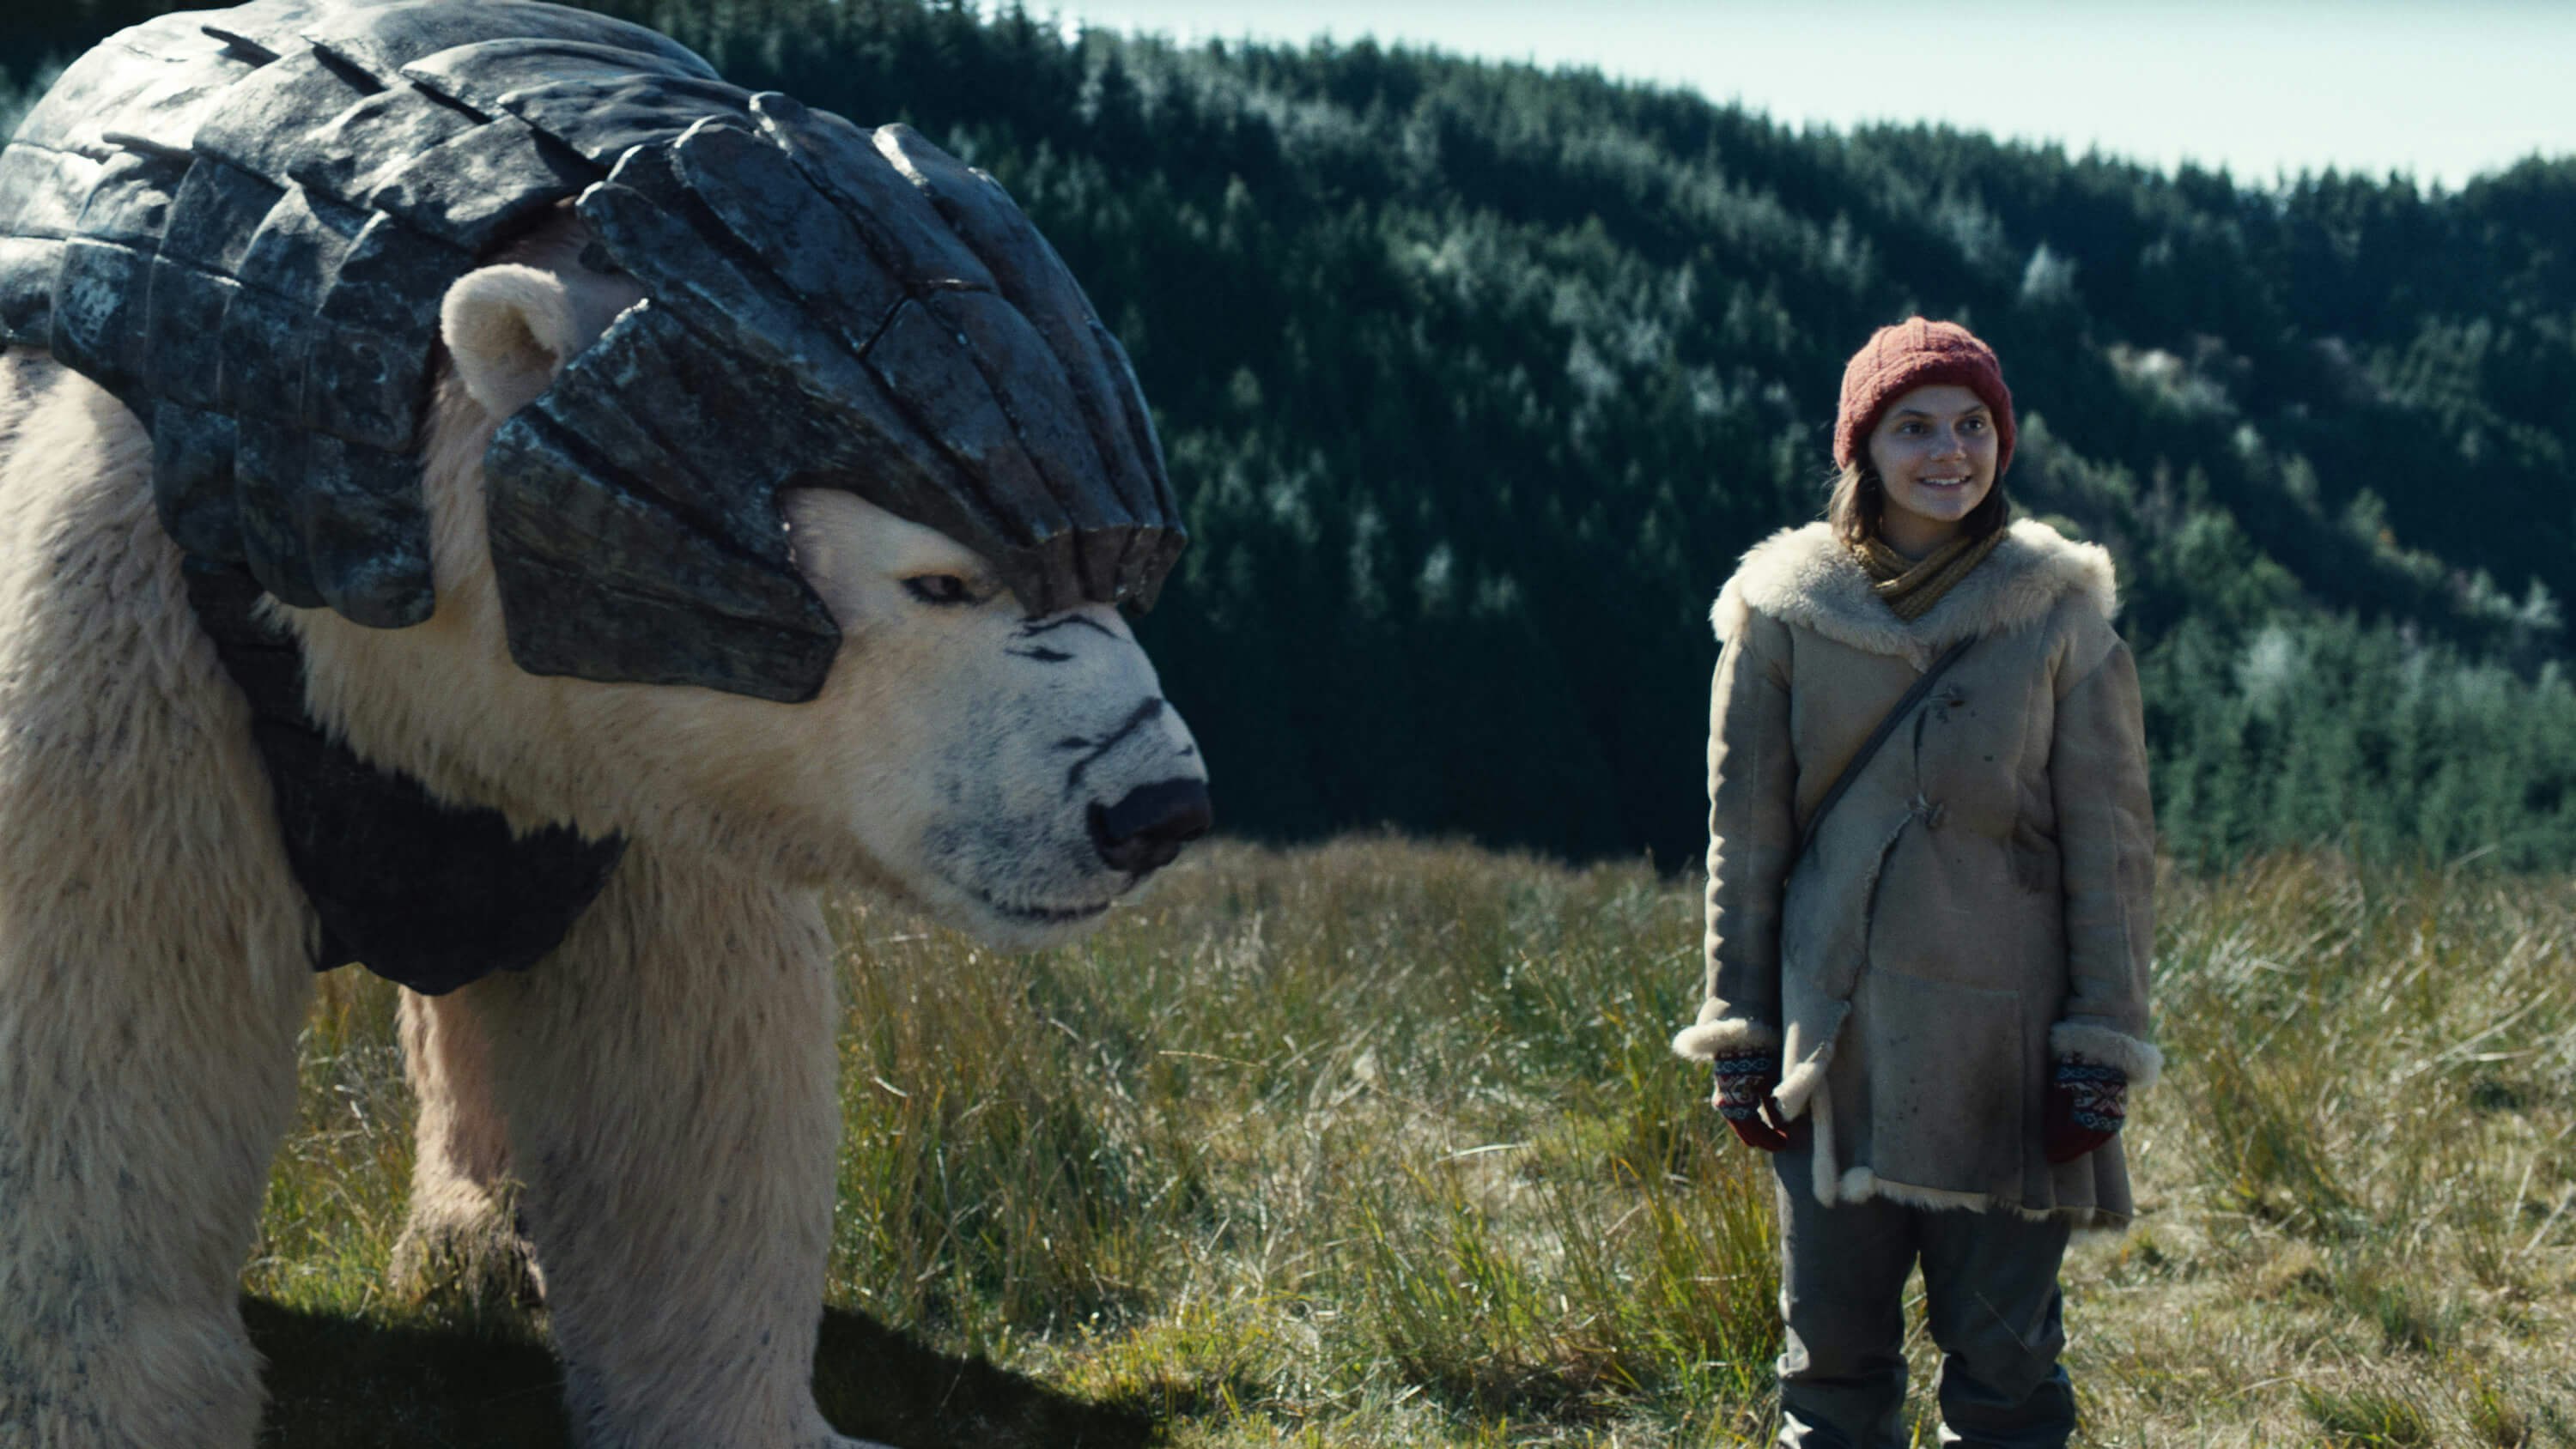 A polar bear with armor stands on the left looking at Lyra, a young girl wearing a red hat, gloves and thick coat.